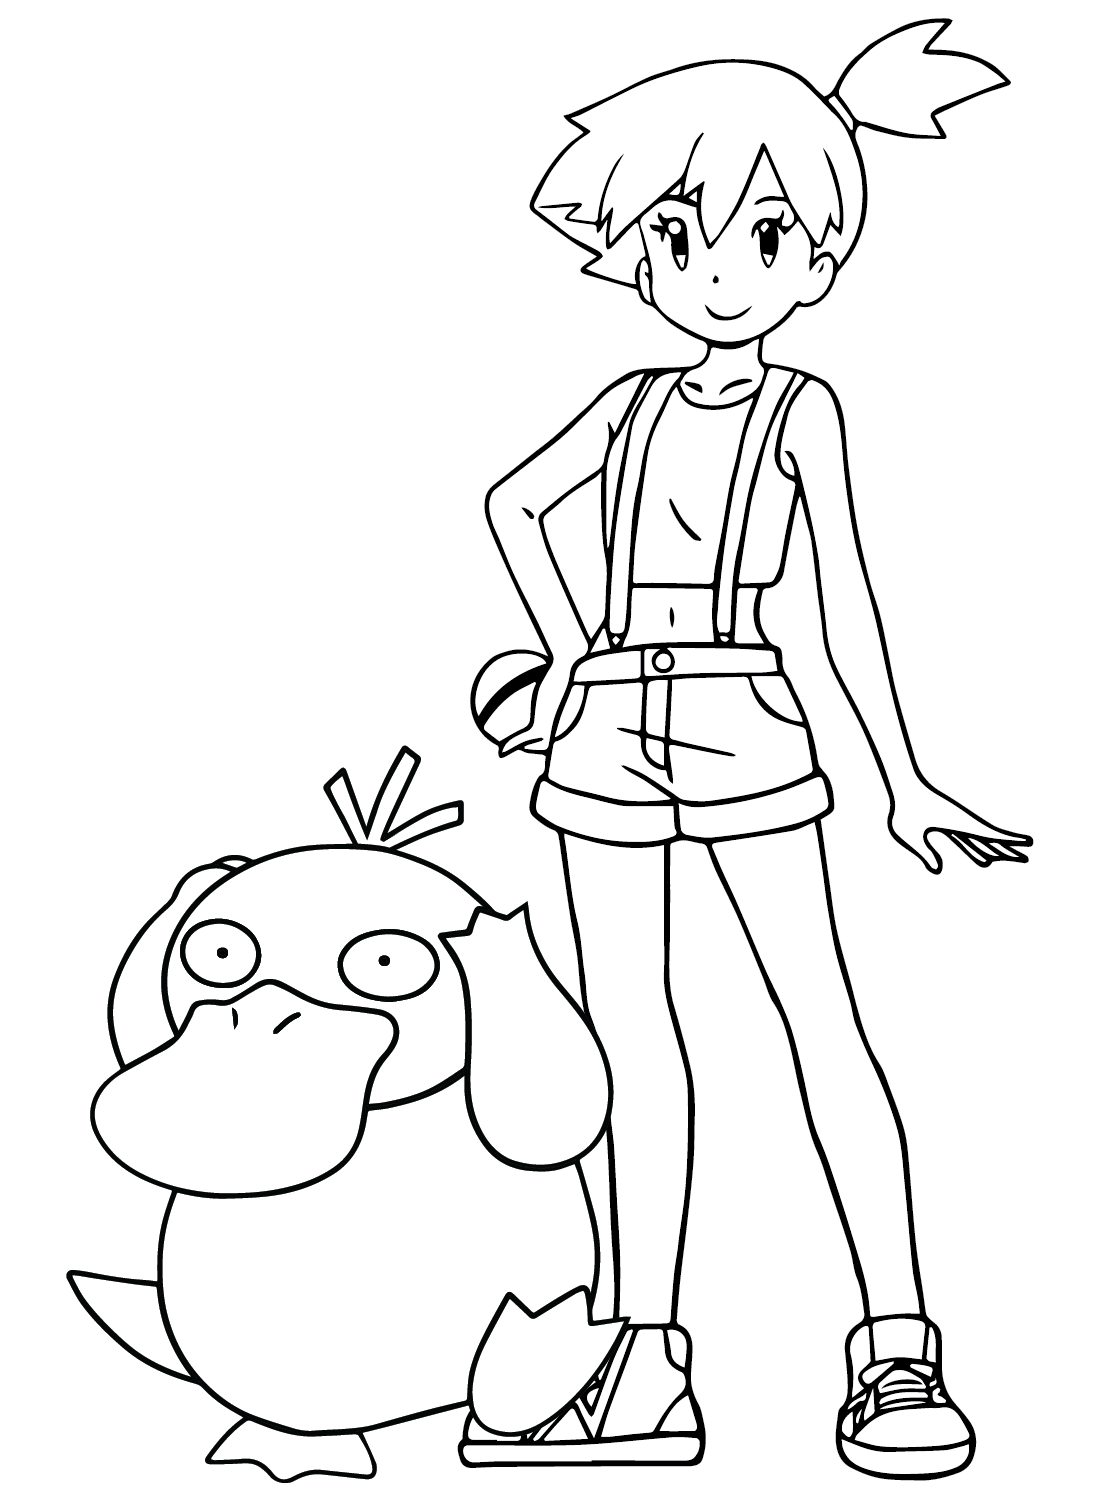 Misty and Psyduck Coloring Page from Misty